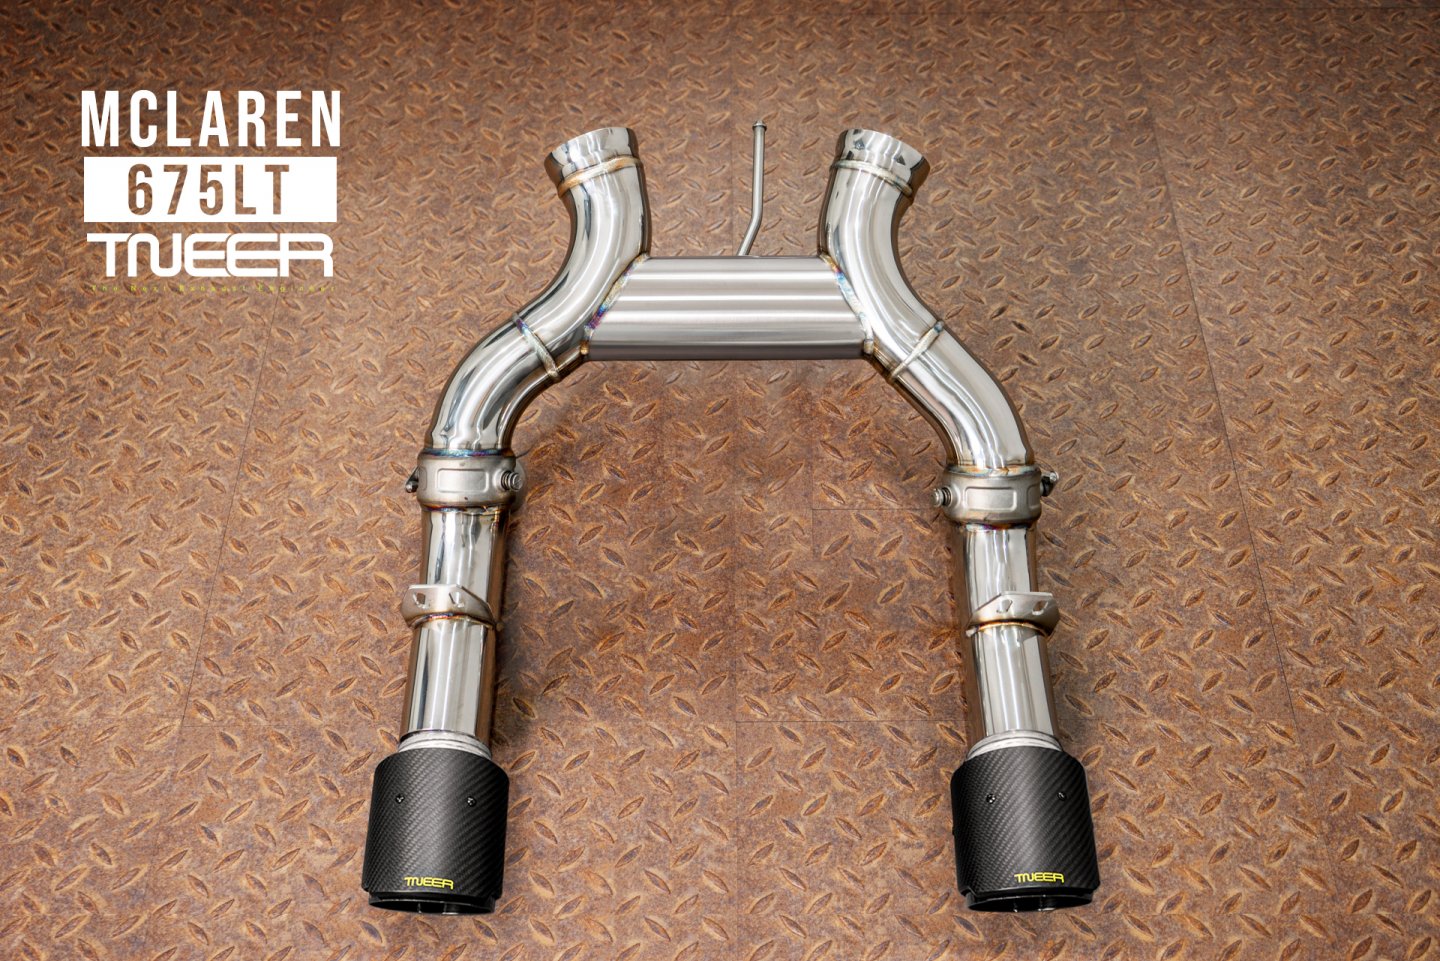 Mercedes-Benz W205 C400 / C450 High-Performance TNEER Downpipes